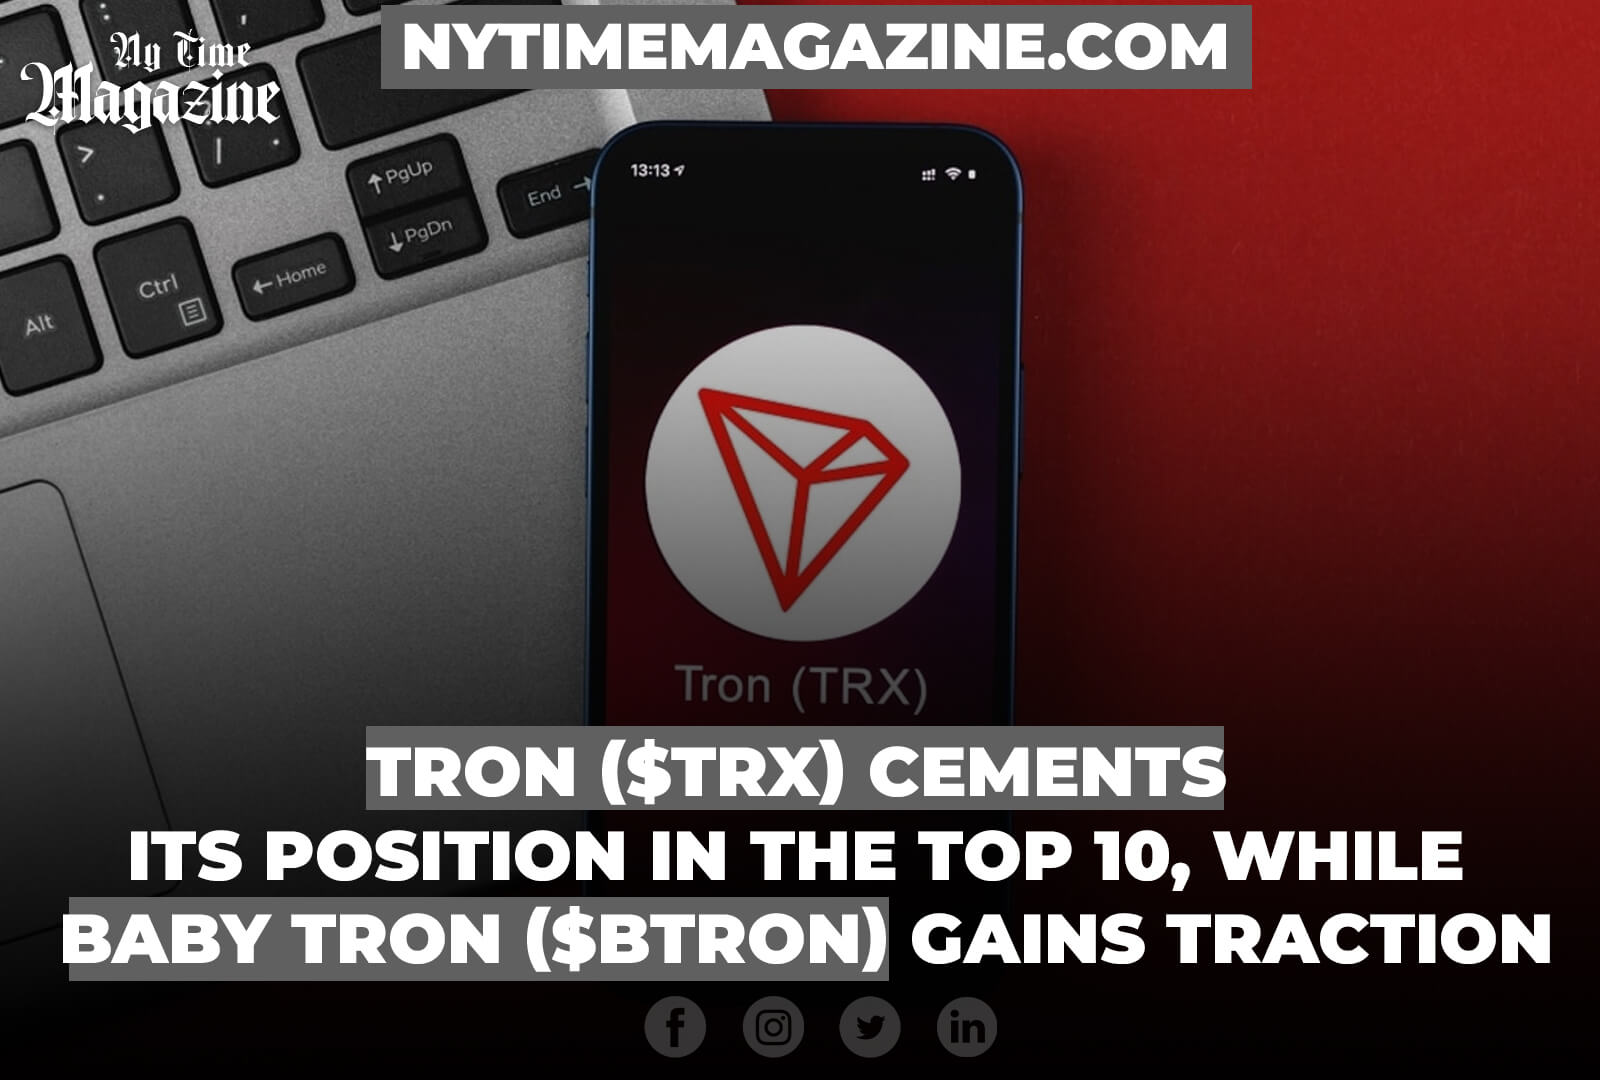 TRON ($TRX) CEMENTS ITS POSITION IN THE TOP 10, WHILE BABY TRON ($BTRON) GAINS TRACTION